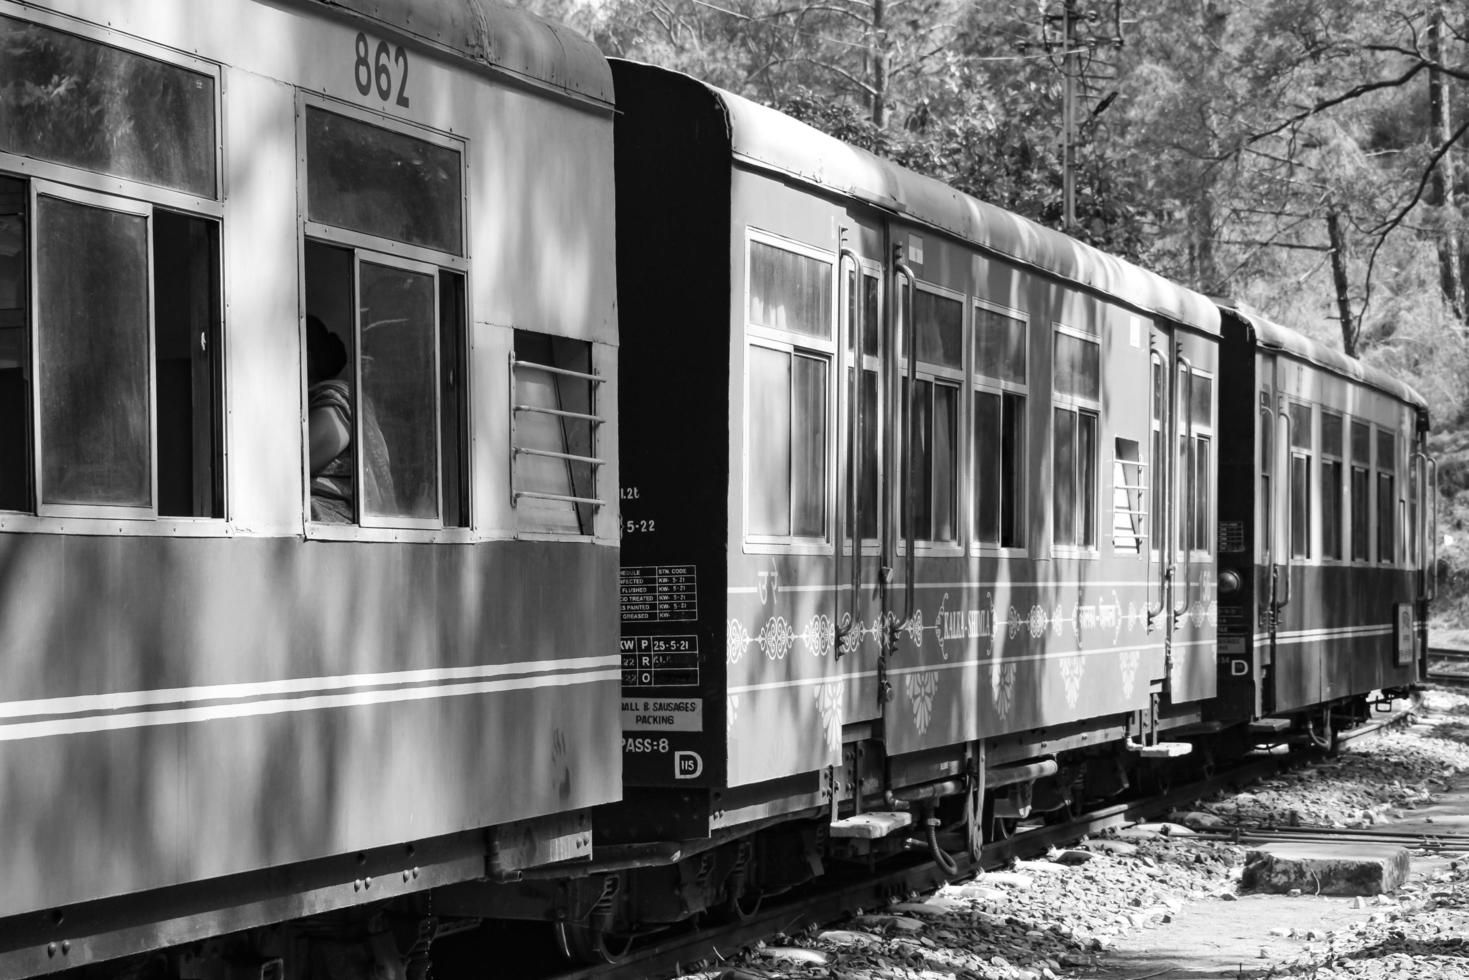 Shimla, Himachal Pradesh, India - May 14, 2022 - Toy train Kalka-Shimla route, moving on railway to the hill, Toy train from Kalka to Shimla in India among green natural forest photo